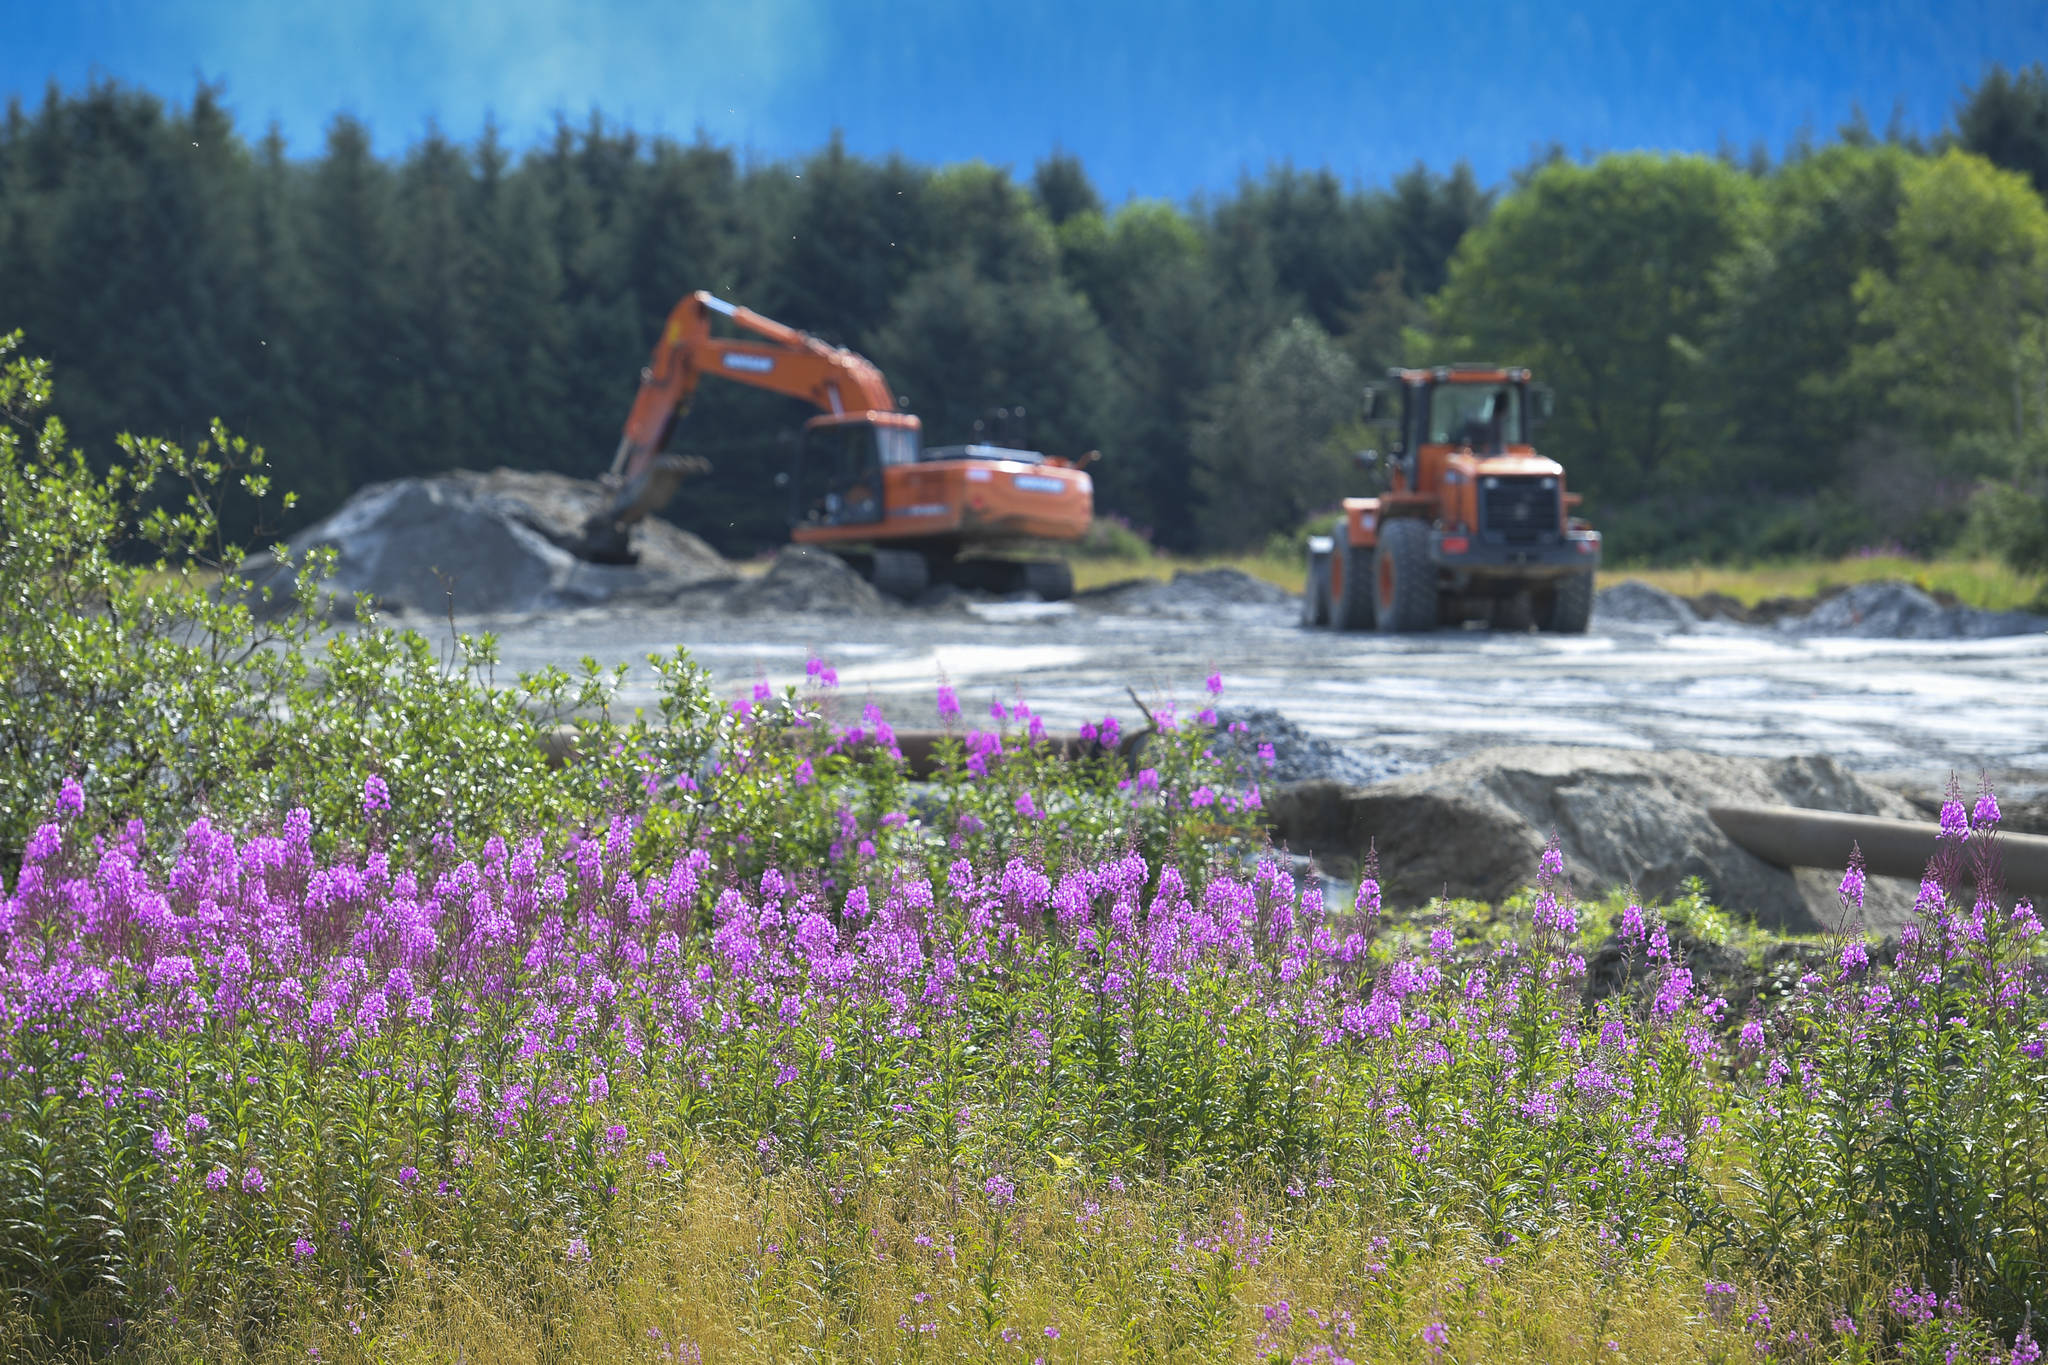 Construction work on land owned by Bicknell, Inc., at Honsinger Pond also known as the Field of Fireweed on Monday, July 22, 2019. Right now, work is focused on a 16-acre portion of a roughly 50-acre parcel. (Michael Penn | Juneau Empire)